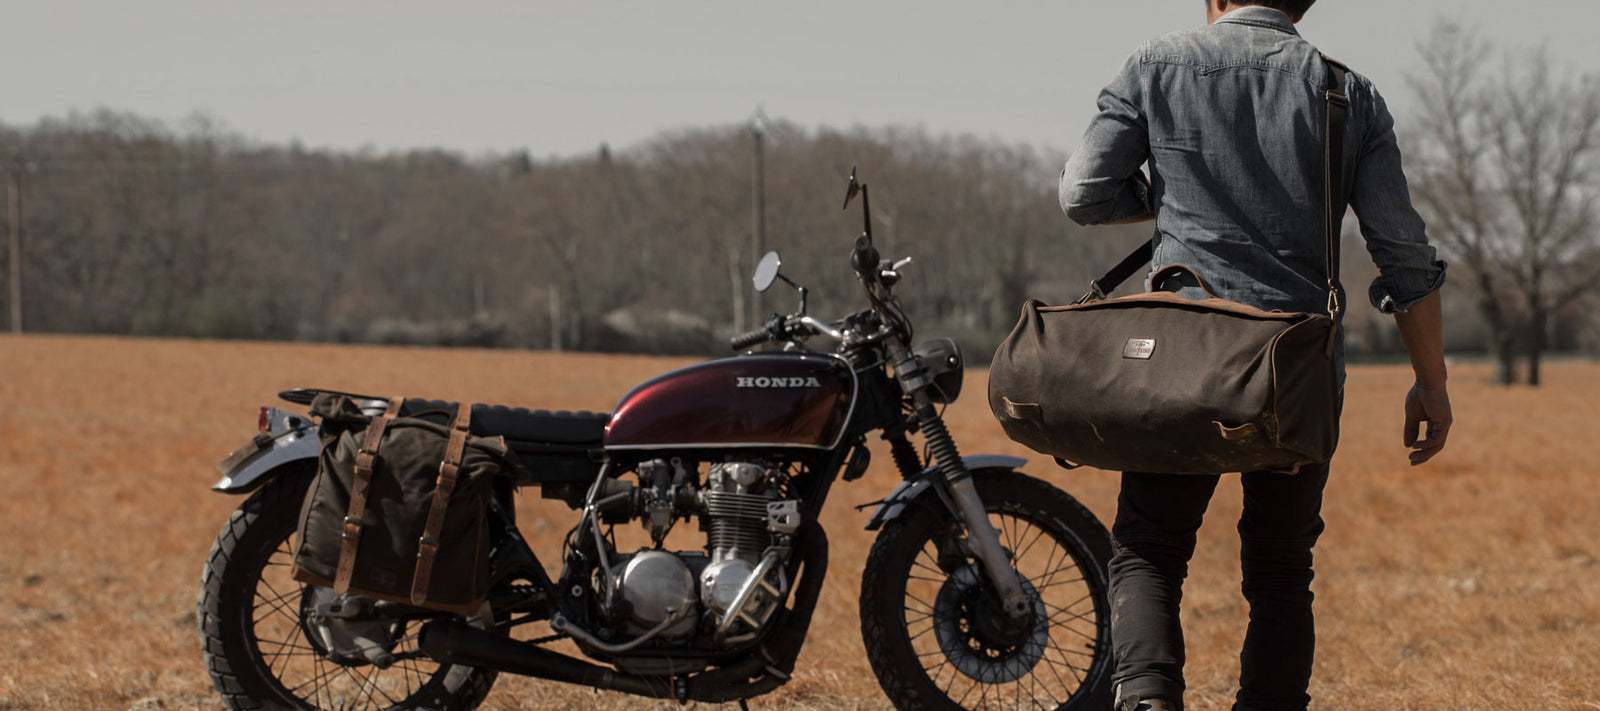 Best Waxed-Cotton Backpack for Bikers. - LONGRIDE